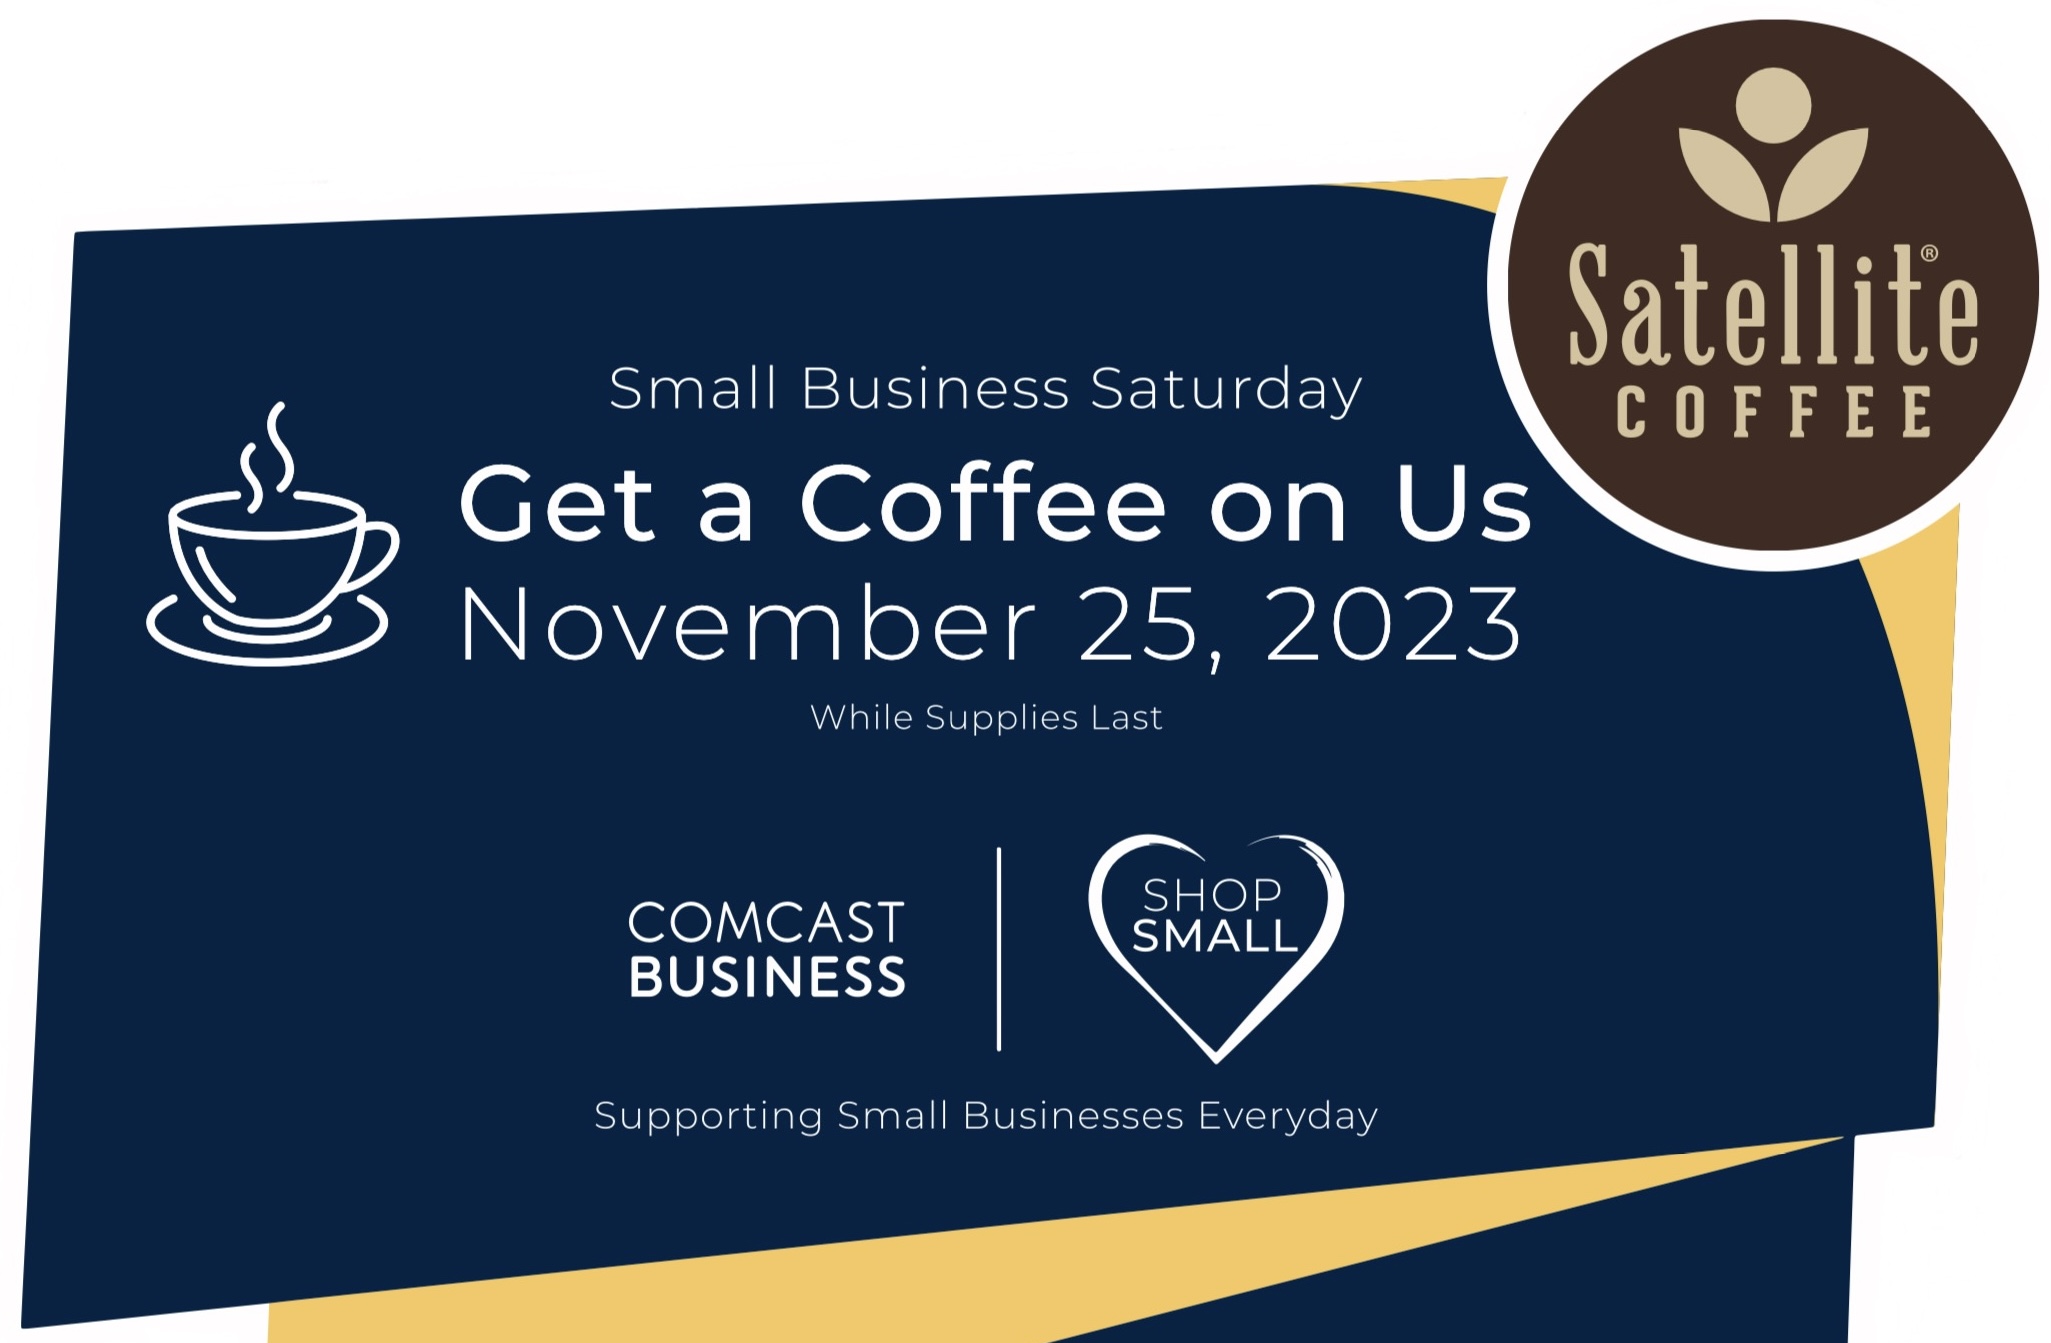 Flyer announcing Comcast and Satellite Coffee partnering on a Small Business Saturday coffee giveaway.